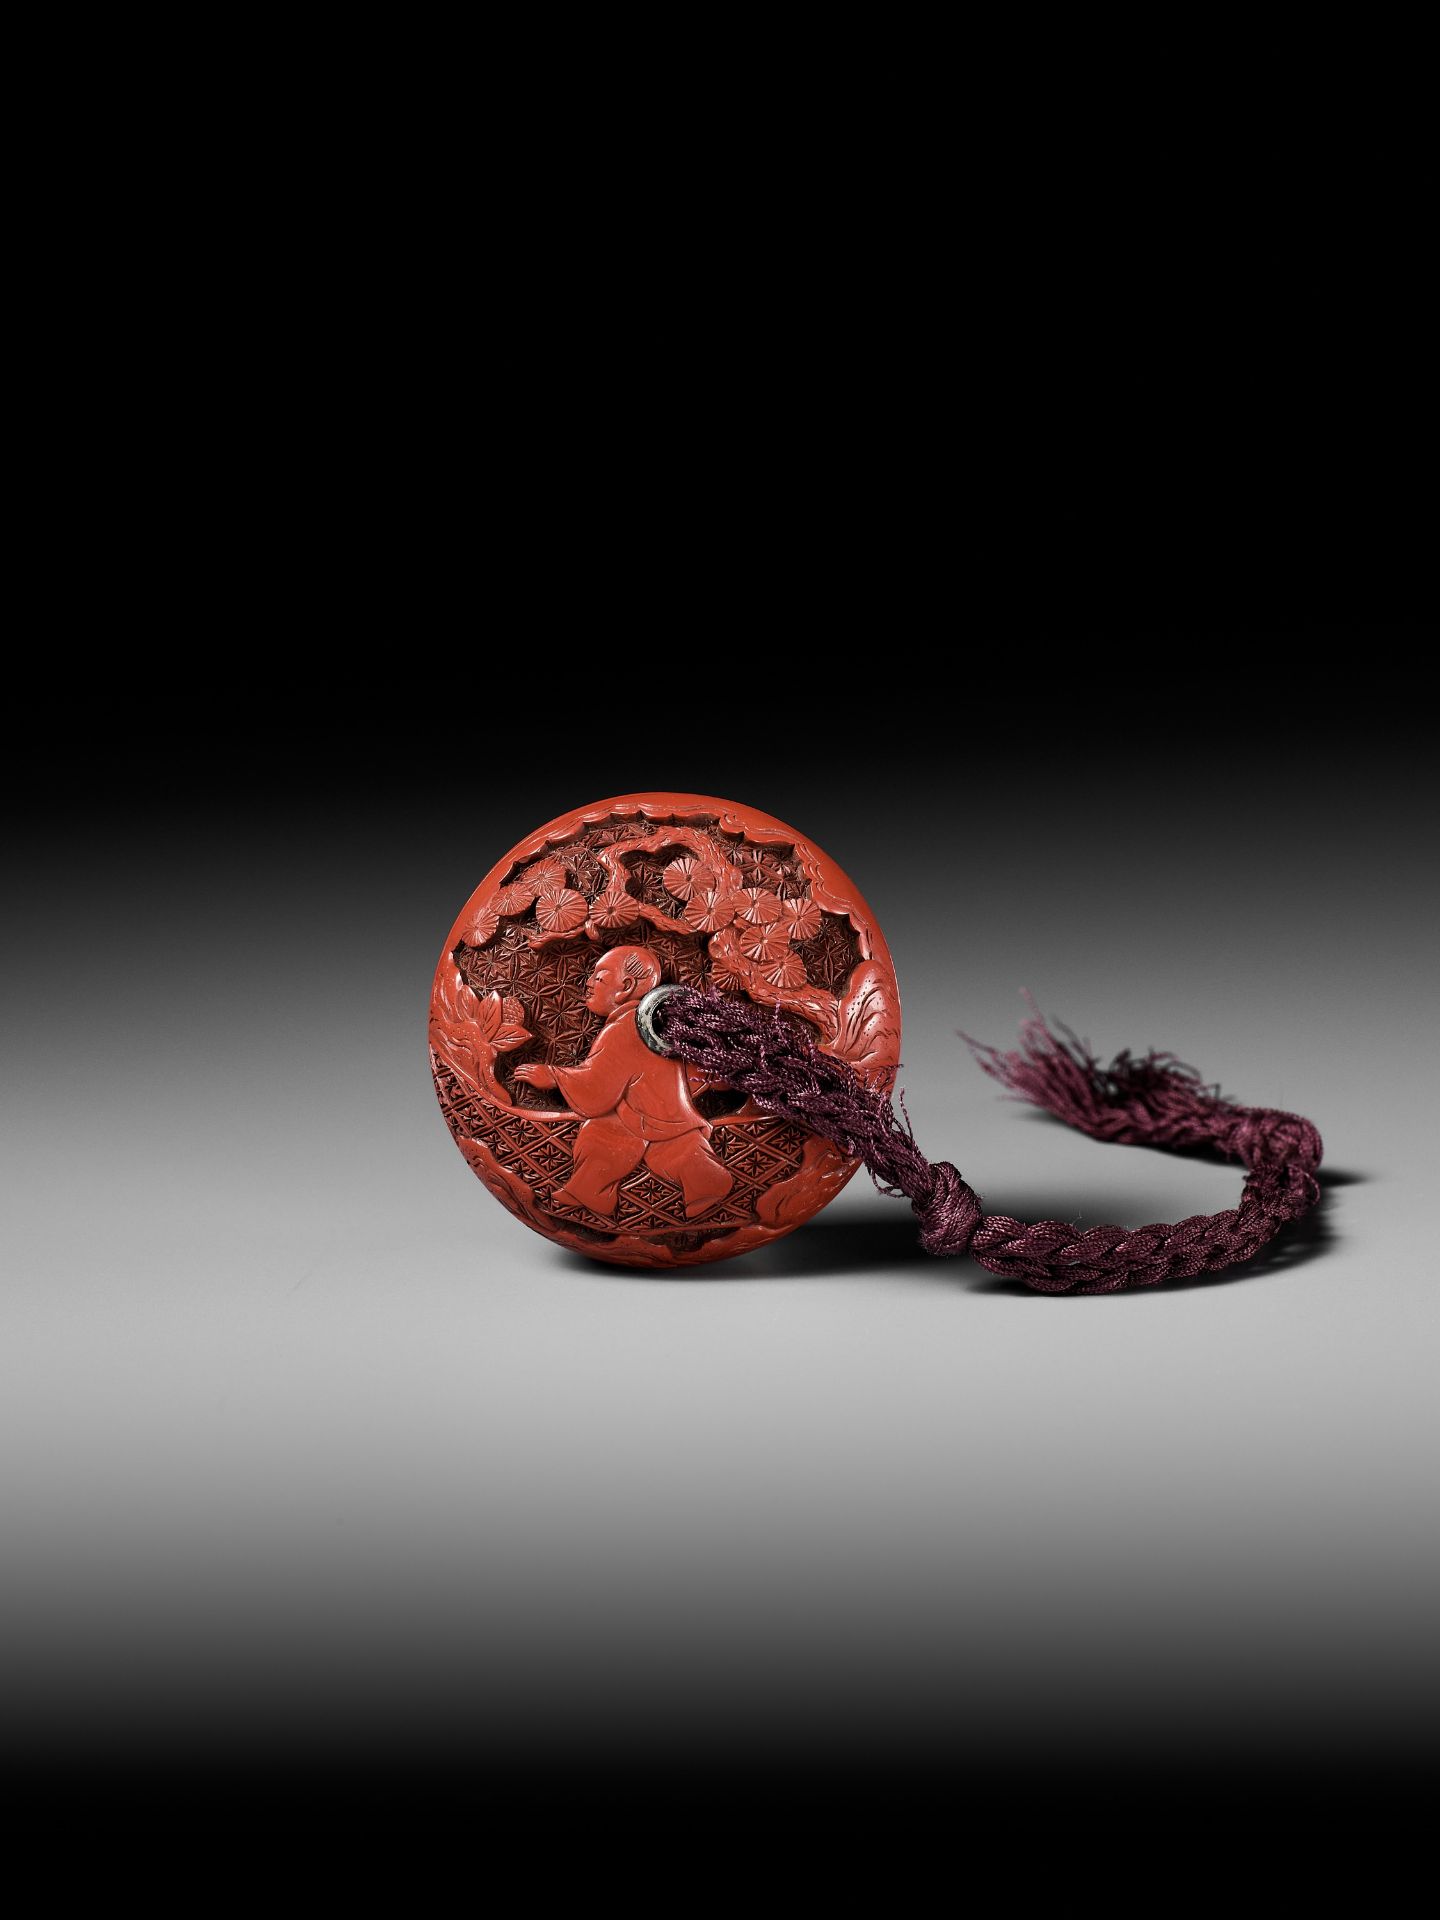 A FINE TSUISHU (CARVED RED LACQUER) MANJU NETSUKE WITH CHINESE LITERATI AND SHISHI - Image 3 of 9